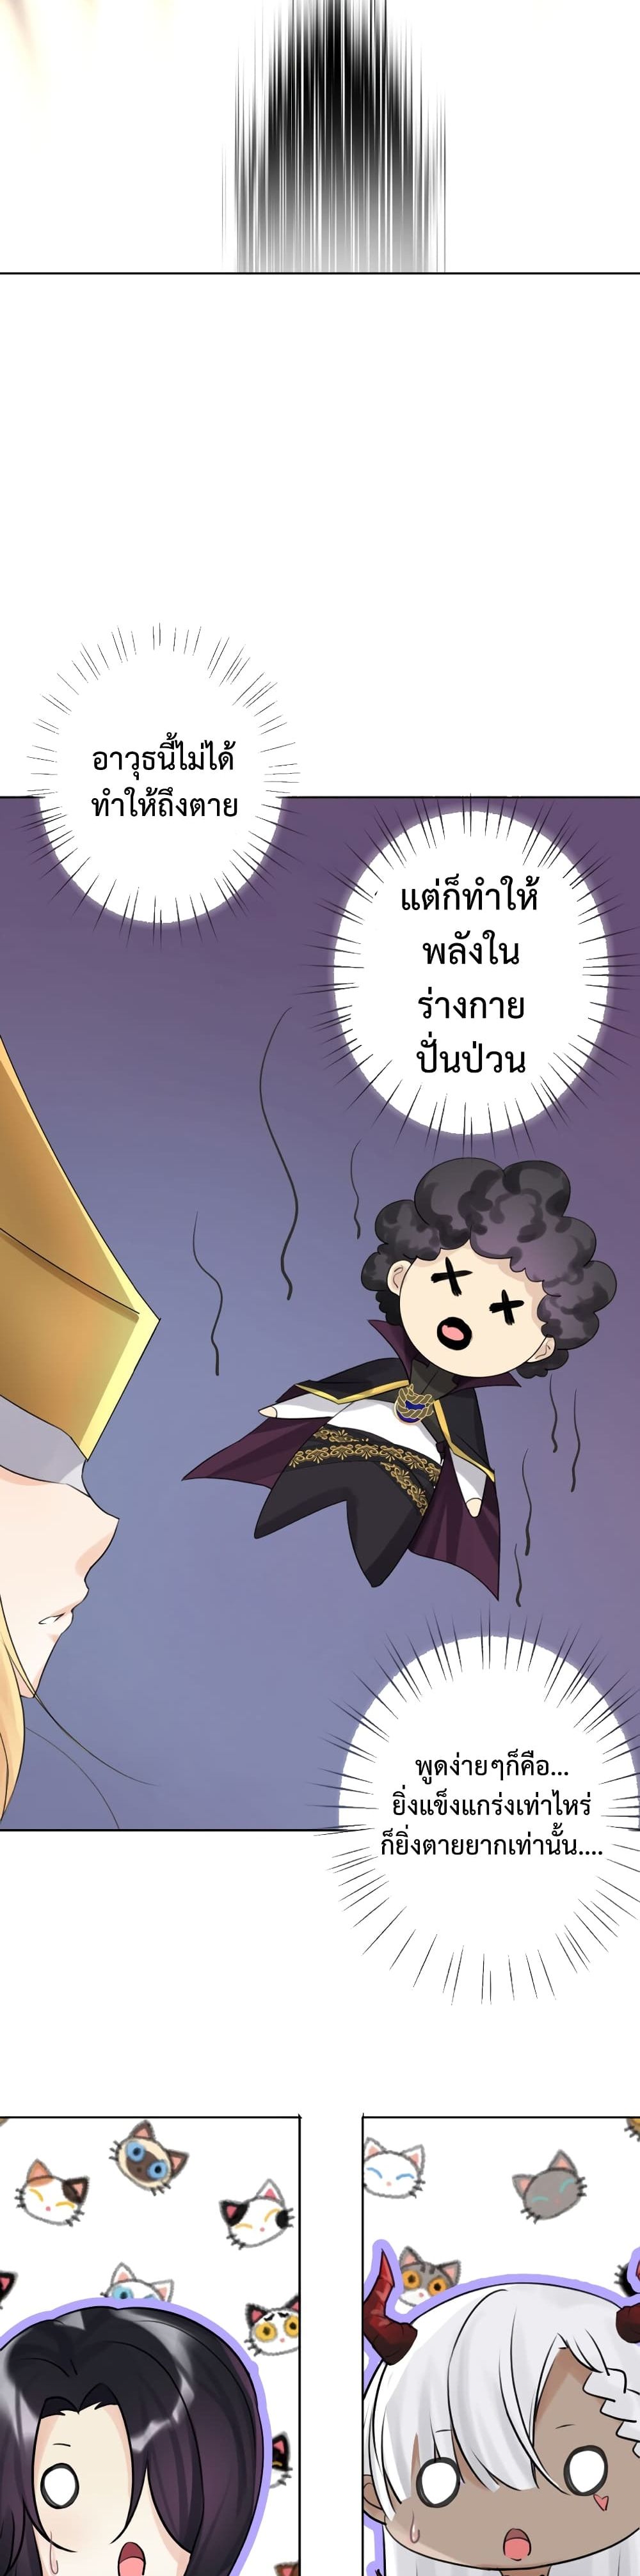 The Hierarch Can’t Resist His Mistresses ท่านอาจารย์กำมะลอ 2-2